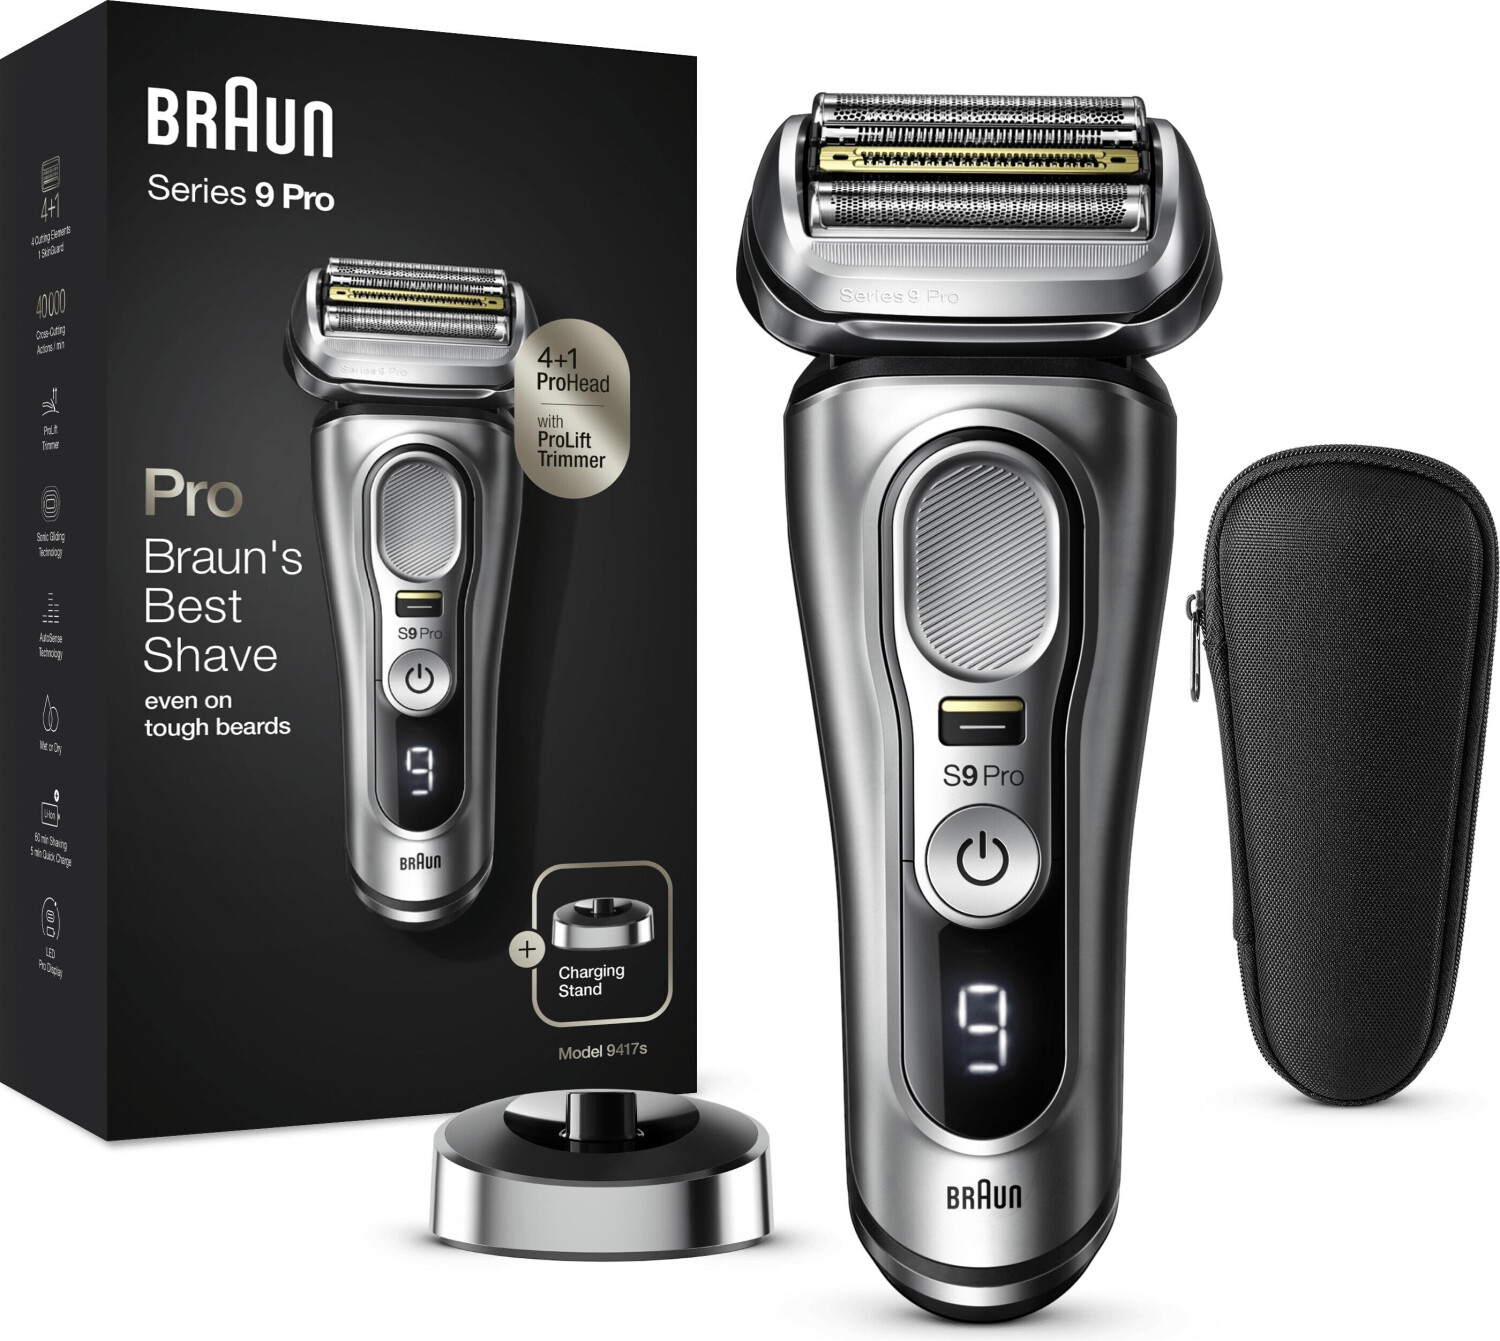 Buy Braun Series 9 Pro 9417s from £219.98 (Today) – Best Deals on